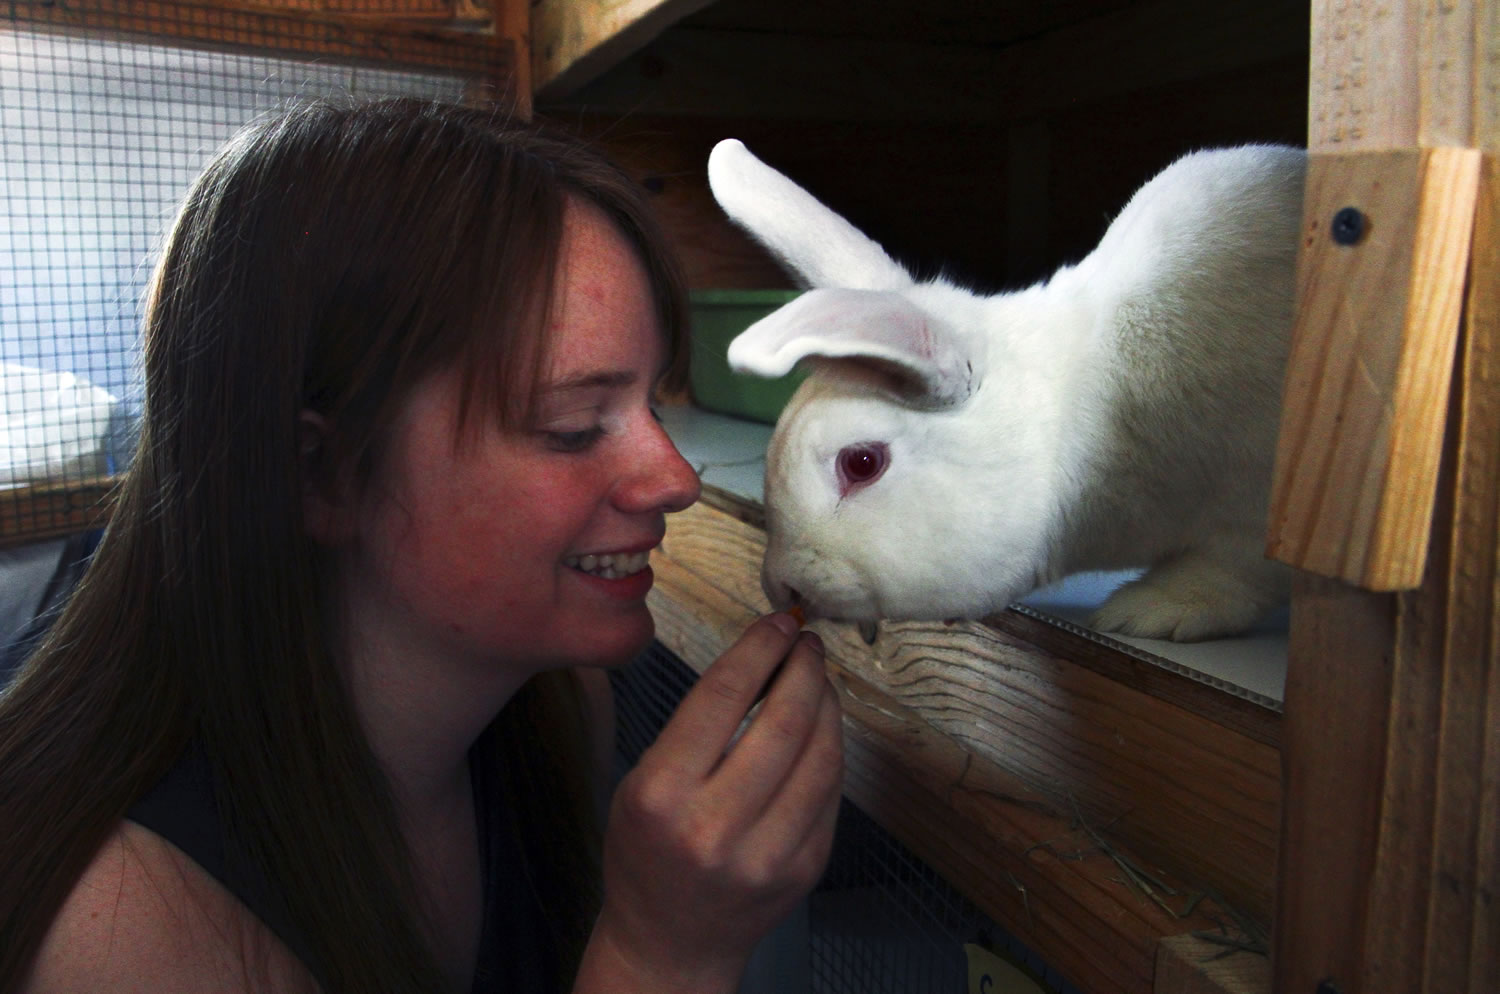 Photos by Tess Freeman/The Register-Guard
Alex Crippen, 18, feeds dried papaya to PJ, a New Zealand rabbit she rescued in January 2012, in Creswell, Ore. Crippen and her mother Heather now care for more than 60 rabbits that they have rescued as part of their nonprofit Red Barn Rabbit Rescue.